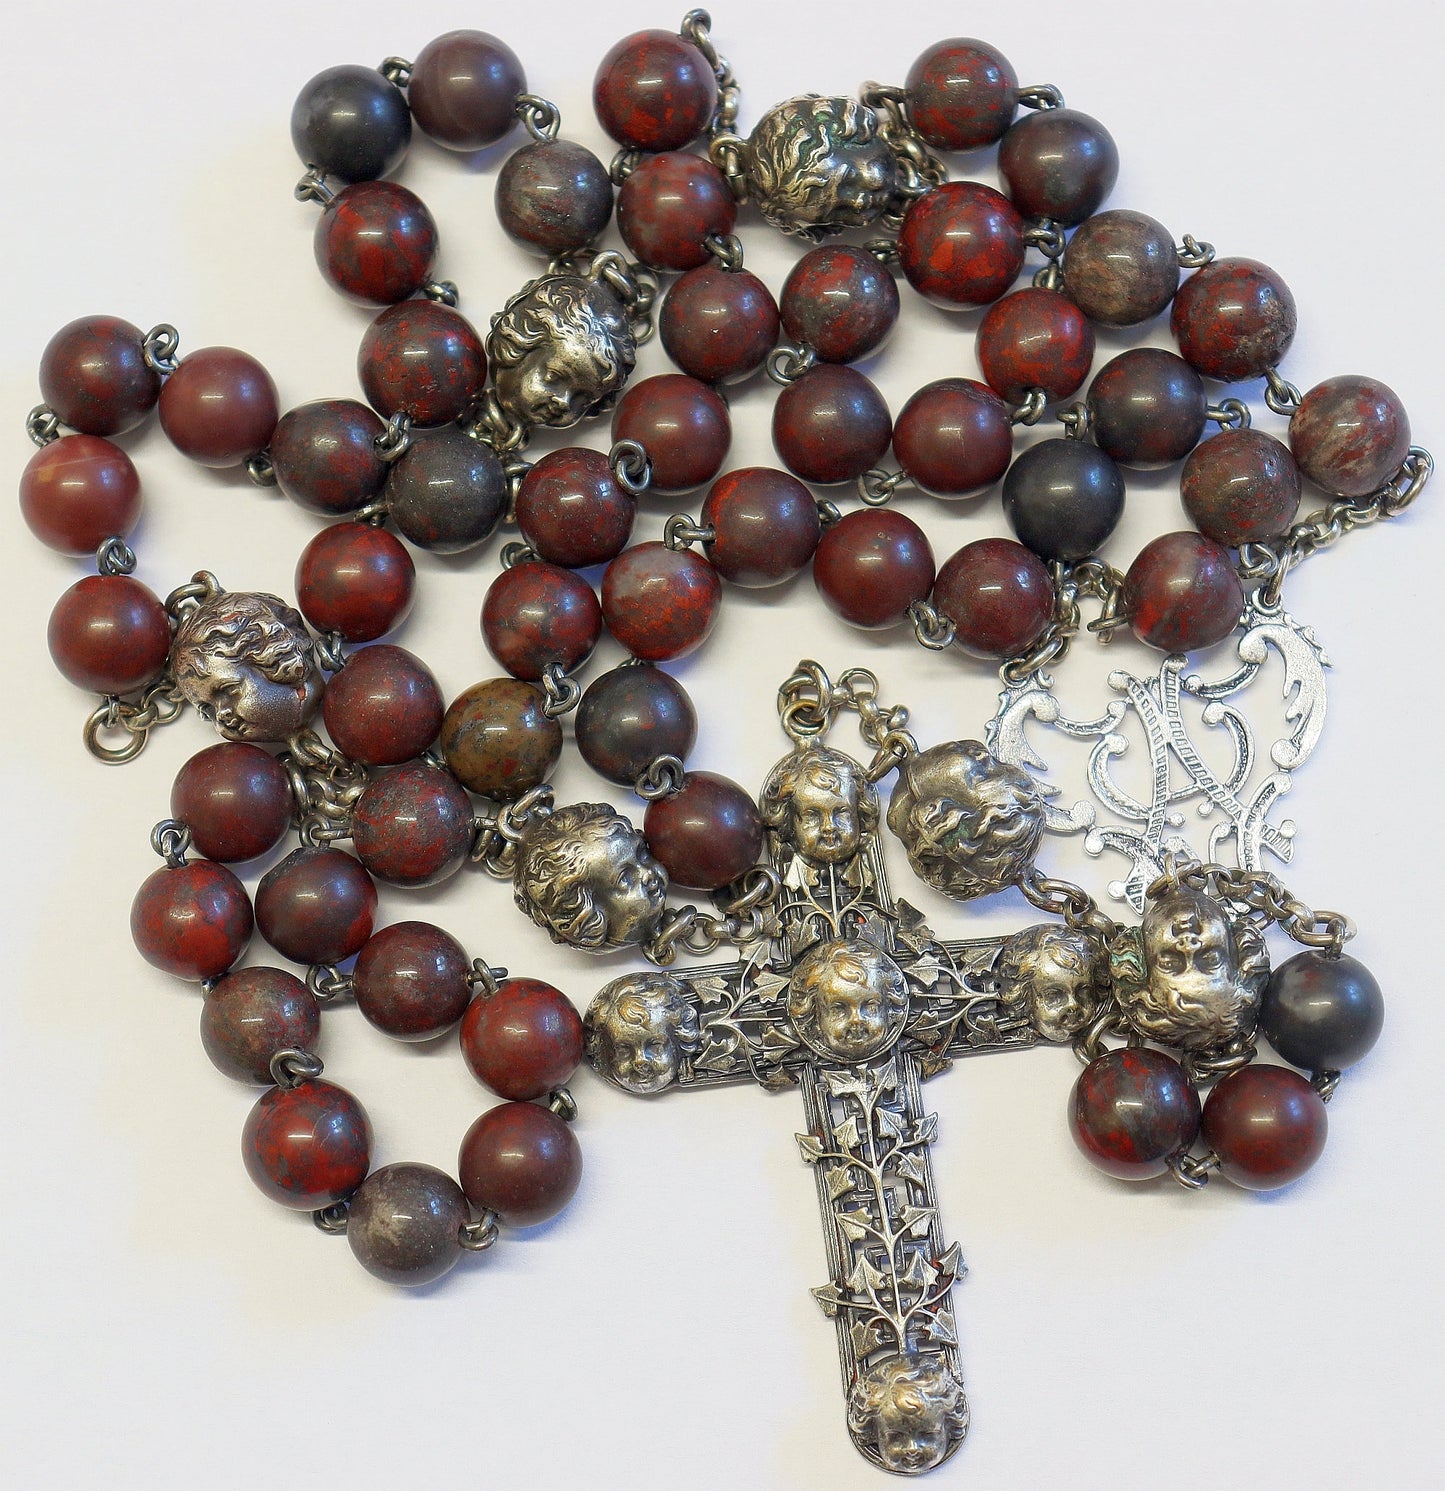 Bloodstone & Sterling Silver Vintage Catholic Rosary Early 20th Cent. - Unique Design.